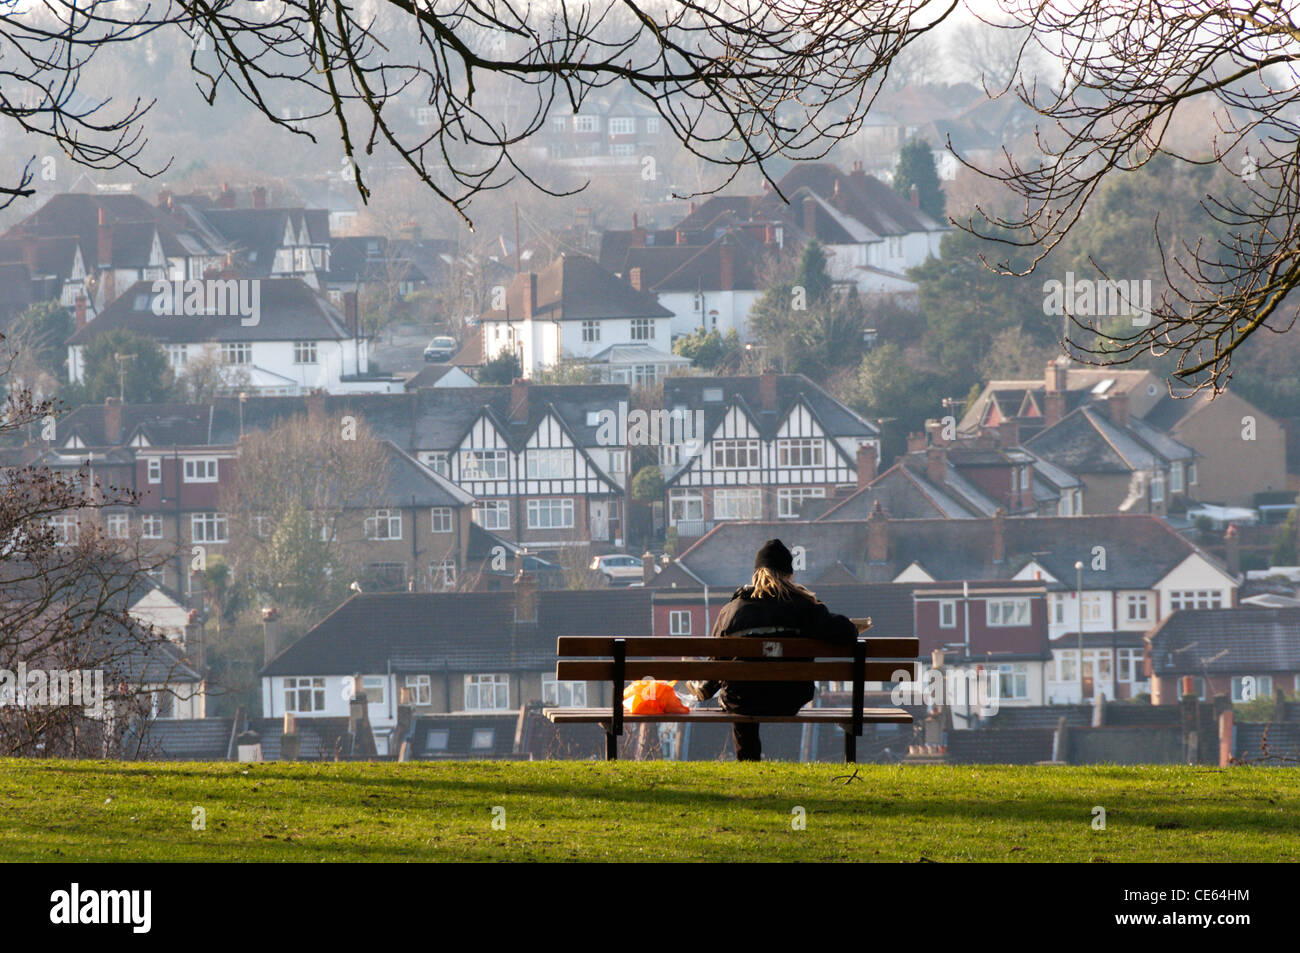 A person rests on a seat overlooking the South London suburb of Shortlands and reads a newspaper. Stock Photo